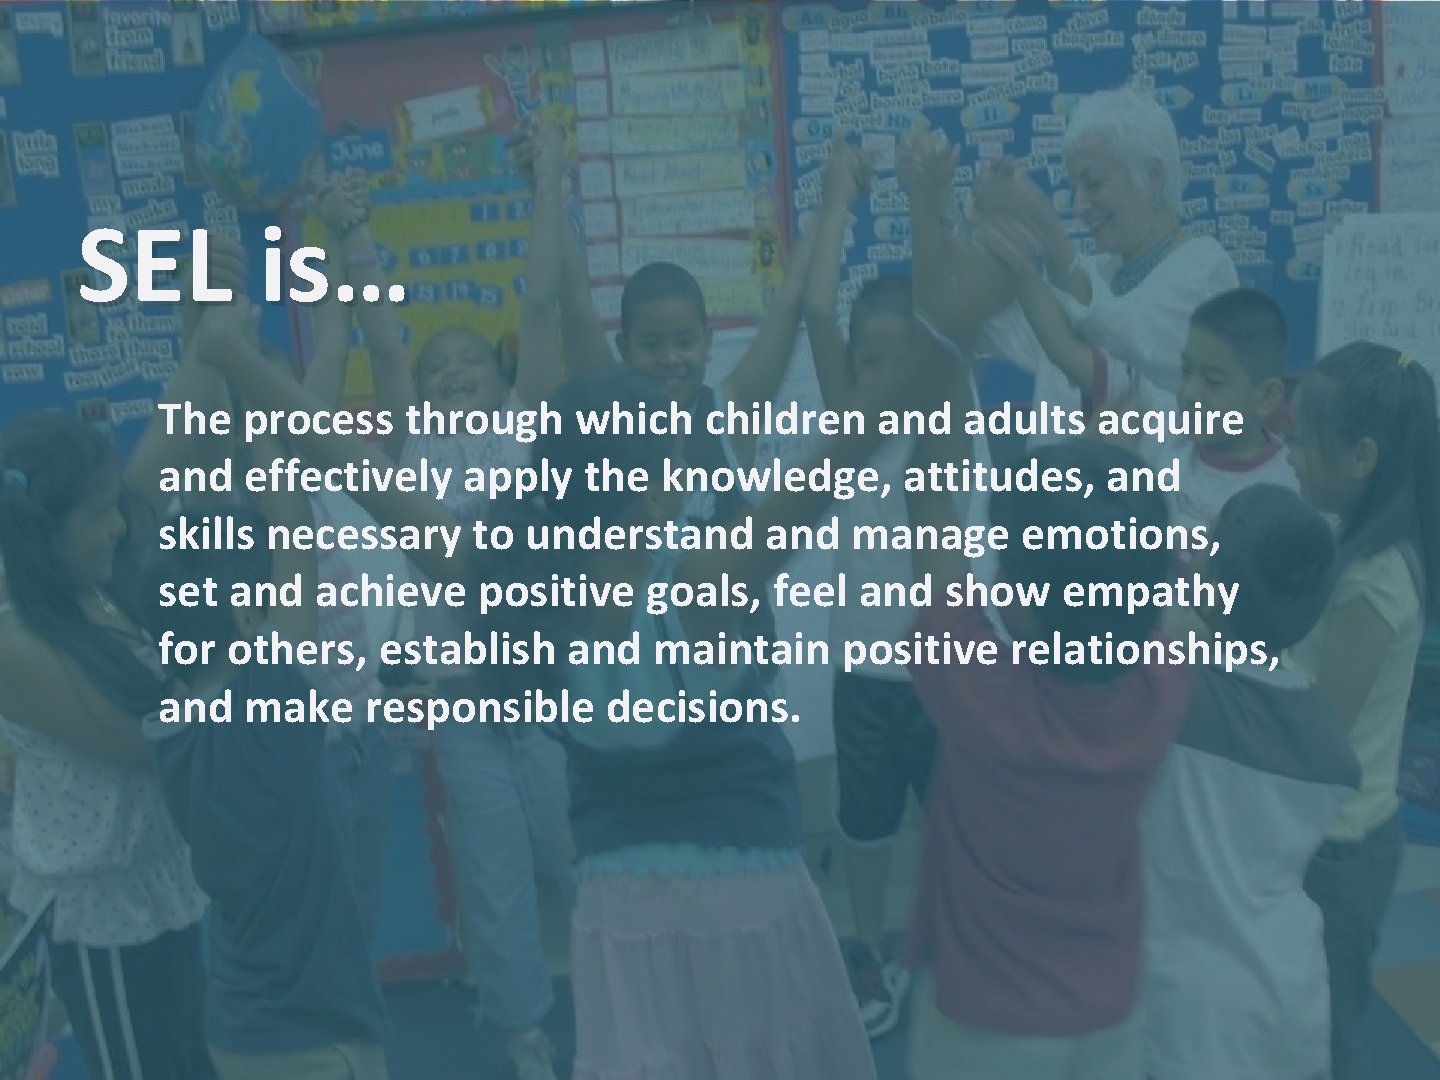 SEL is… The process through which children and adults acquire and effectively apply the